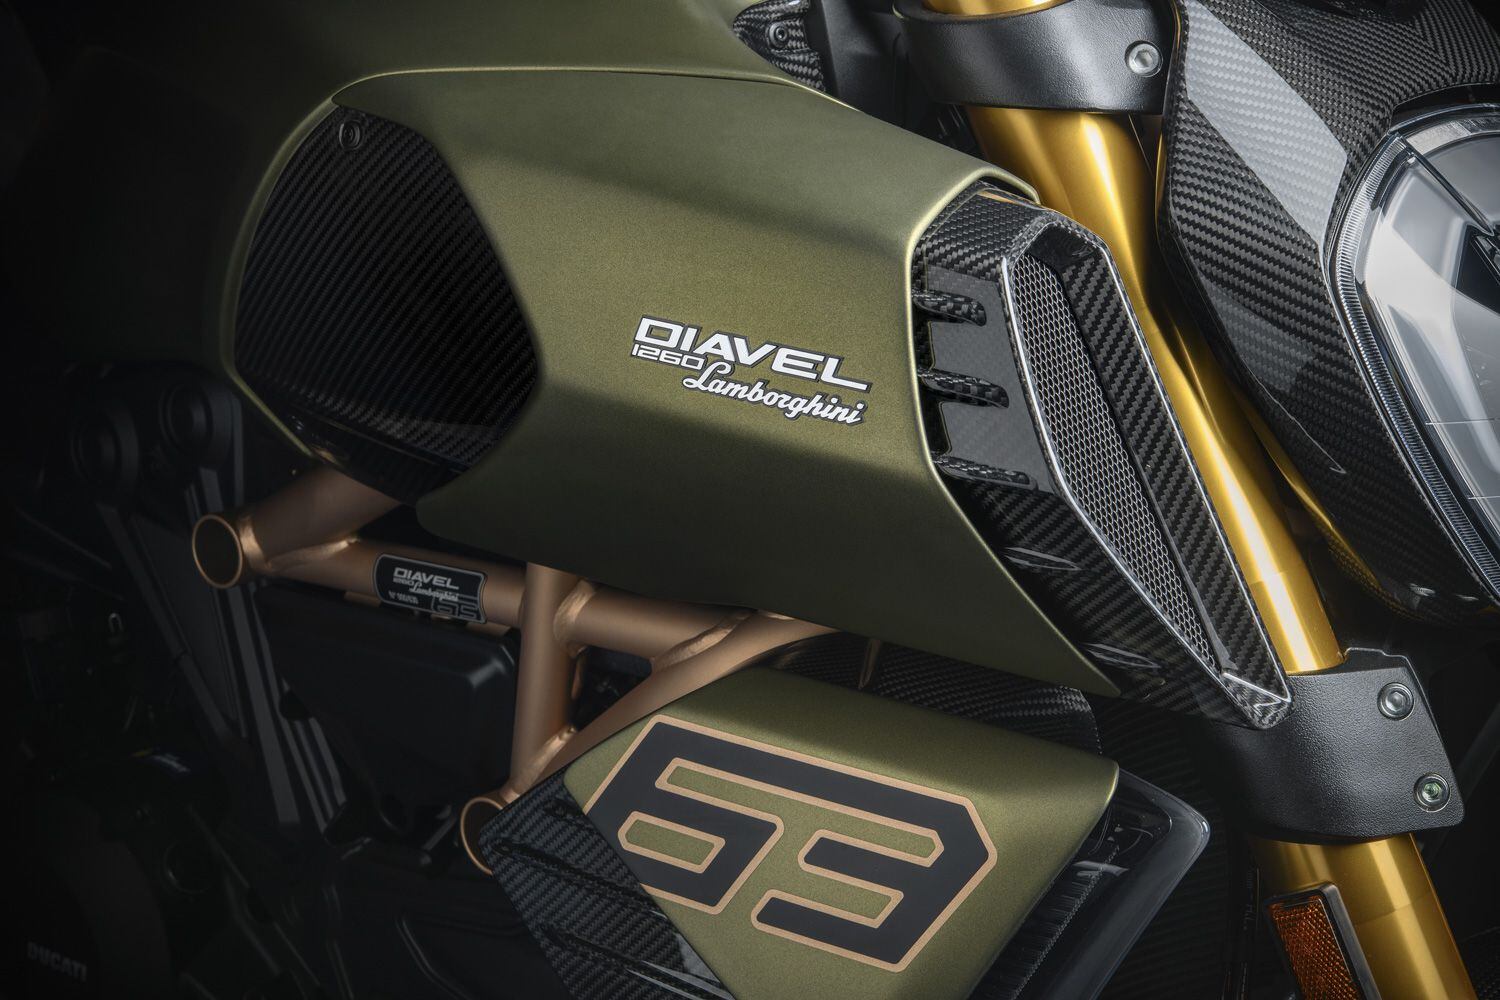 Both Ducati and Lamborghini are part of the Audi Group; now the two have worked together to create a special-edition Diavel 1260. No pricing is set as of yet, but expect it to be expensive and sell out quickly.